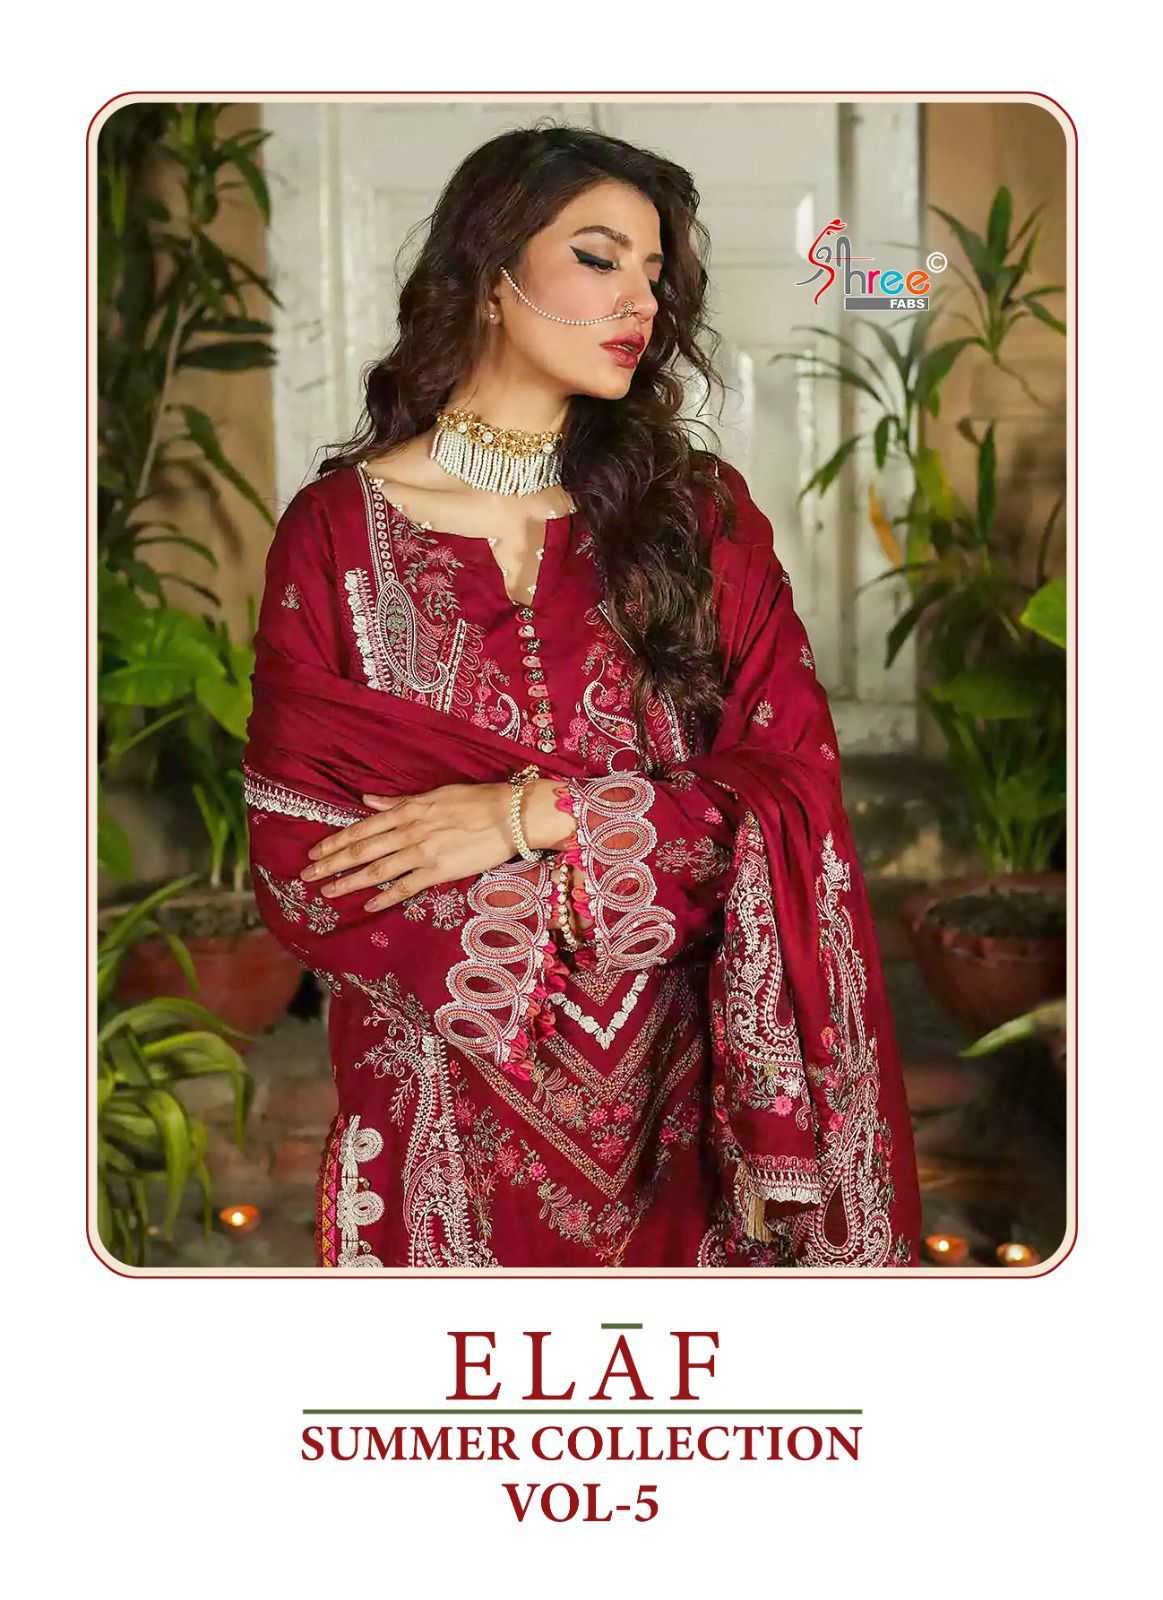 elaf summer collection vol 5 by shree fab designer work pakistani suits